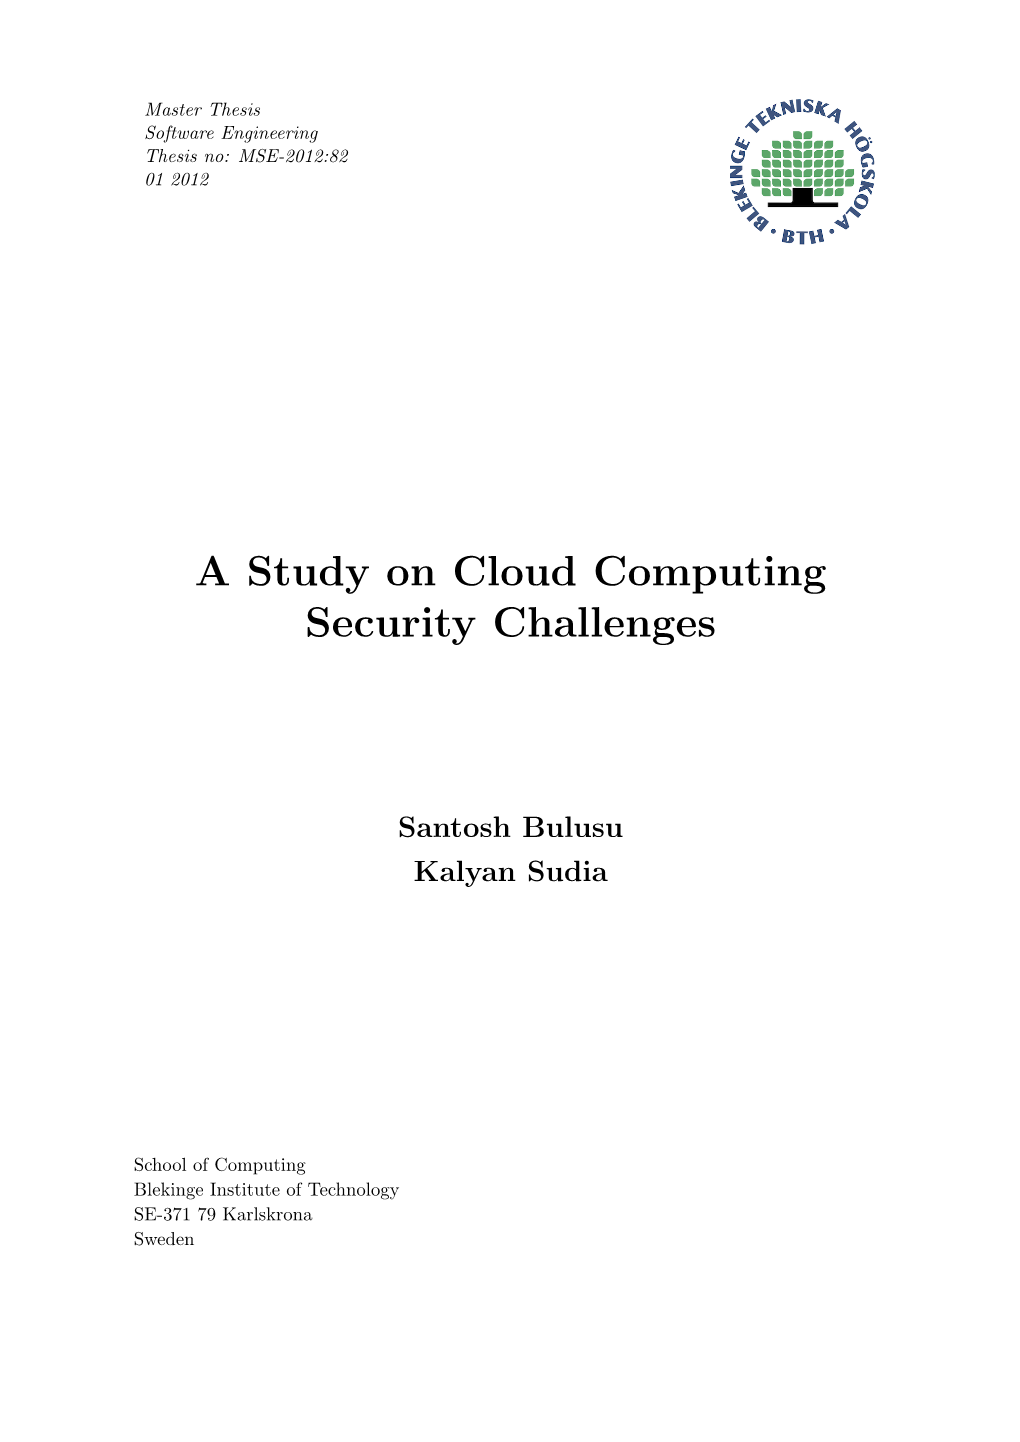 A Study on Cloud Computing Security Challenges